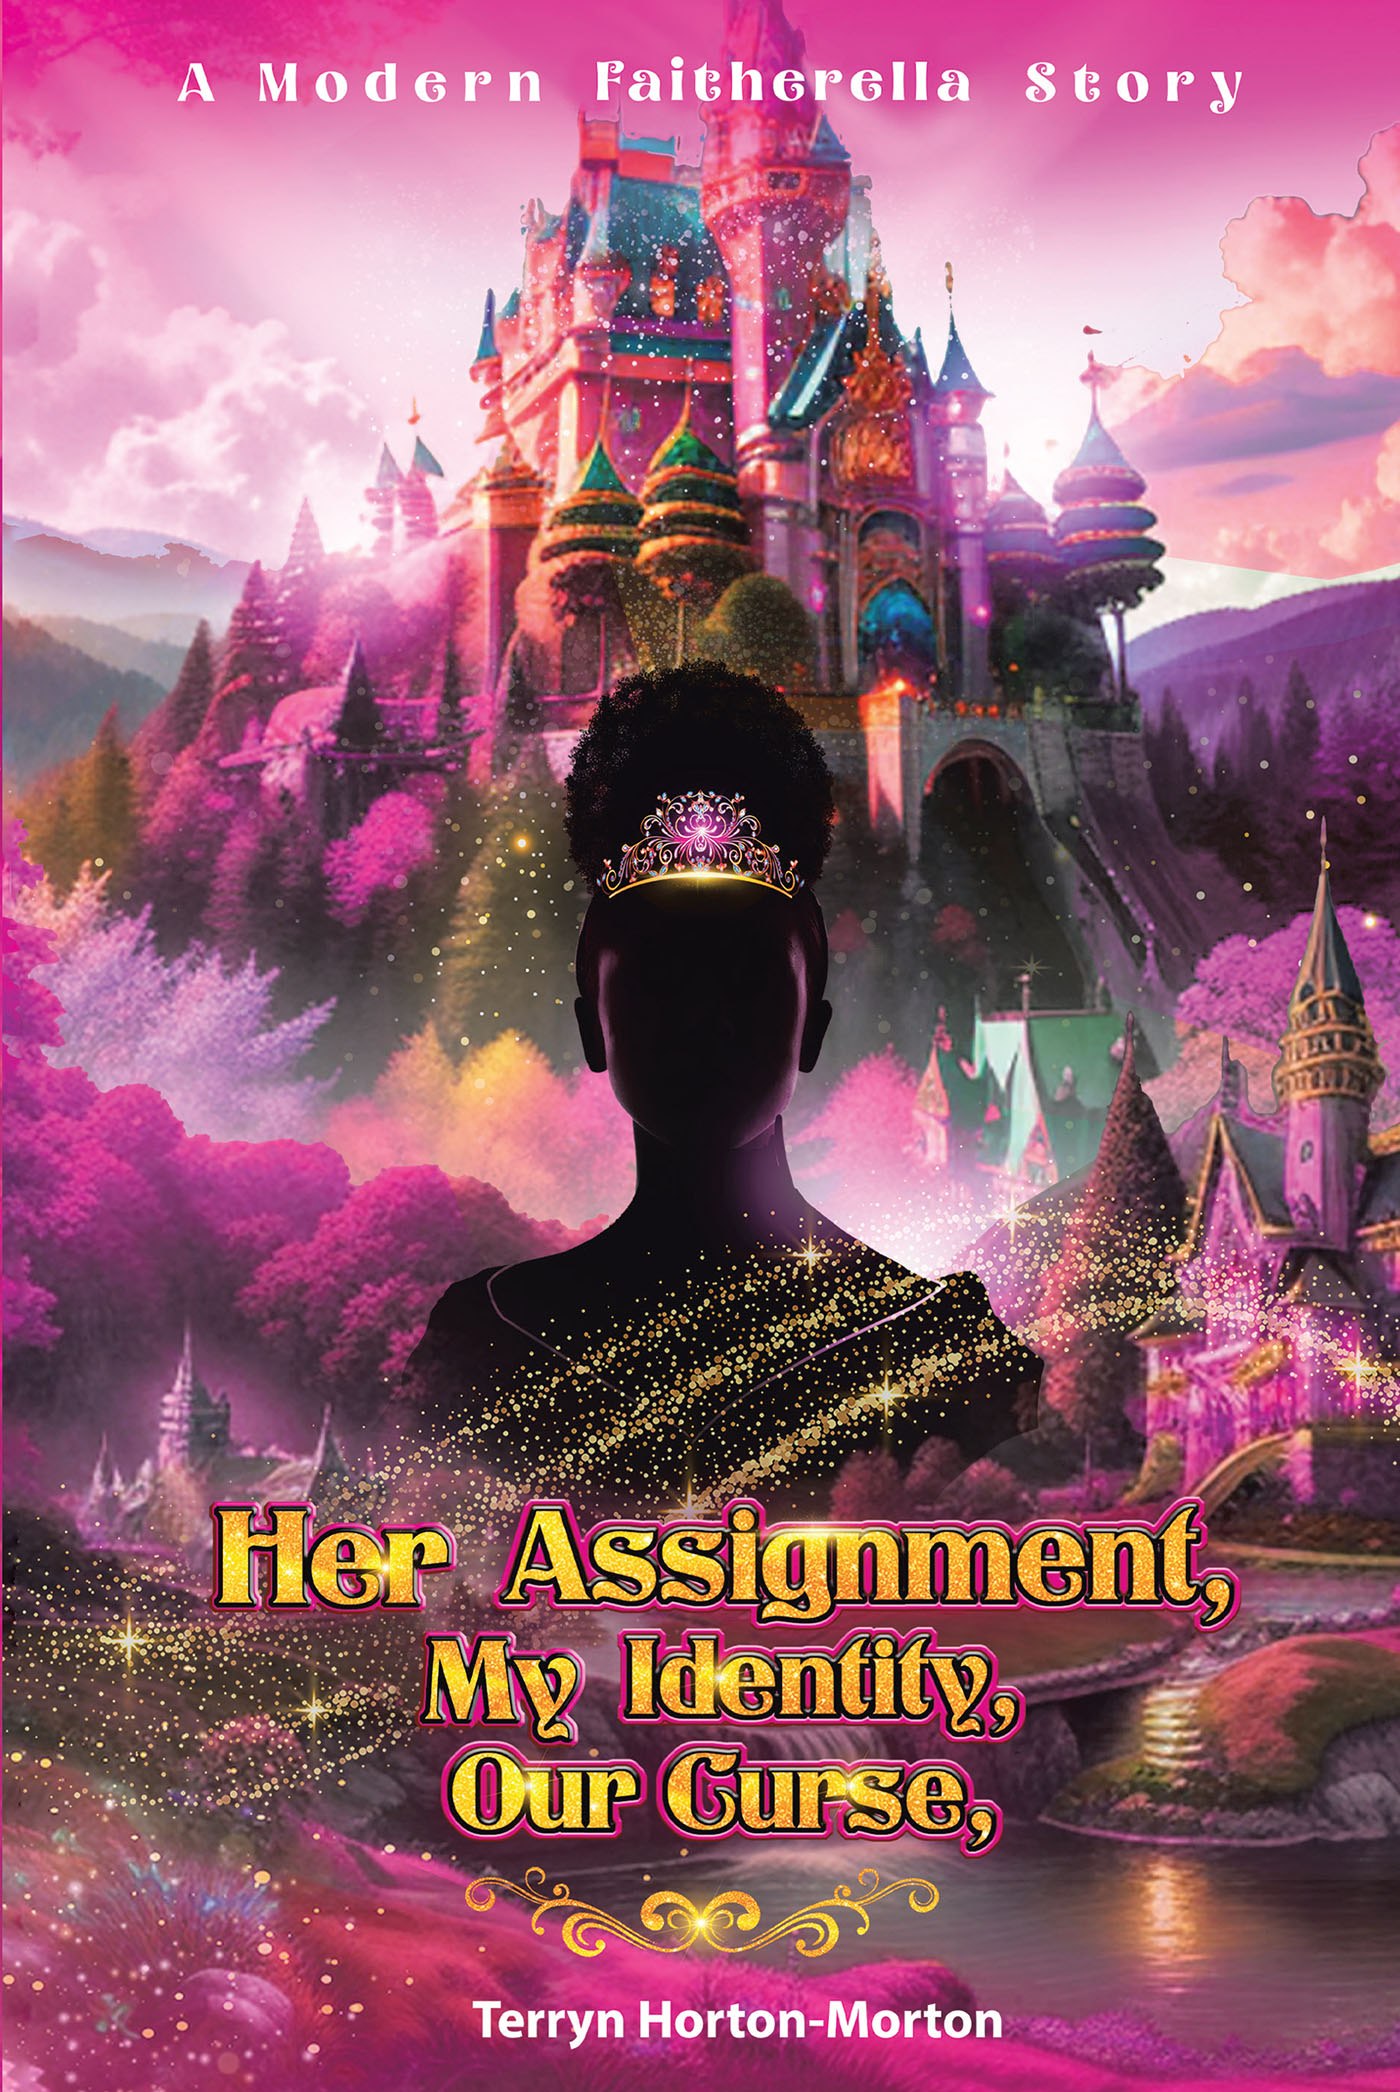 Terryn Horton-Morton’s Newly Released "Her Assignment, My Identity, Our Curse" is an Engaging Exploration of Faith and Overcoming Generational Challenges